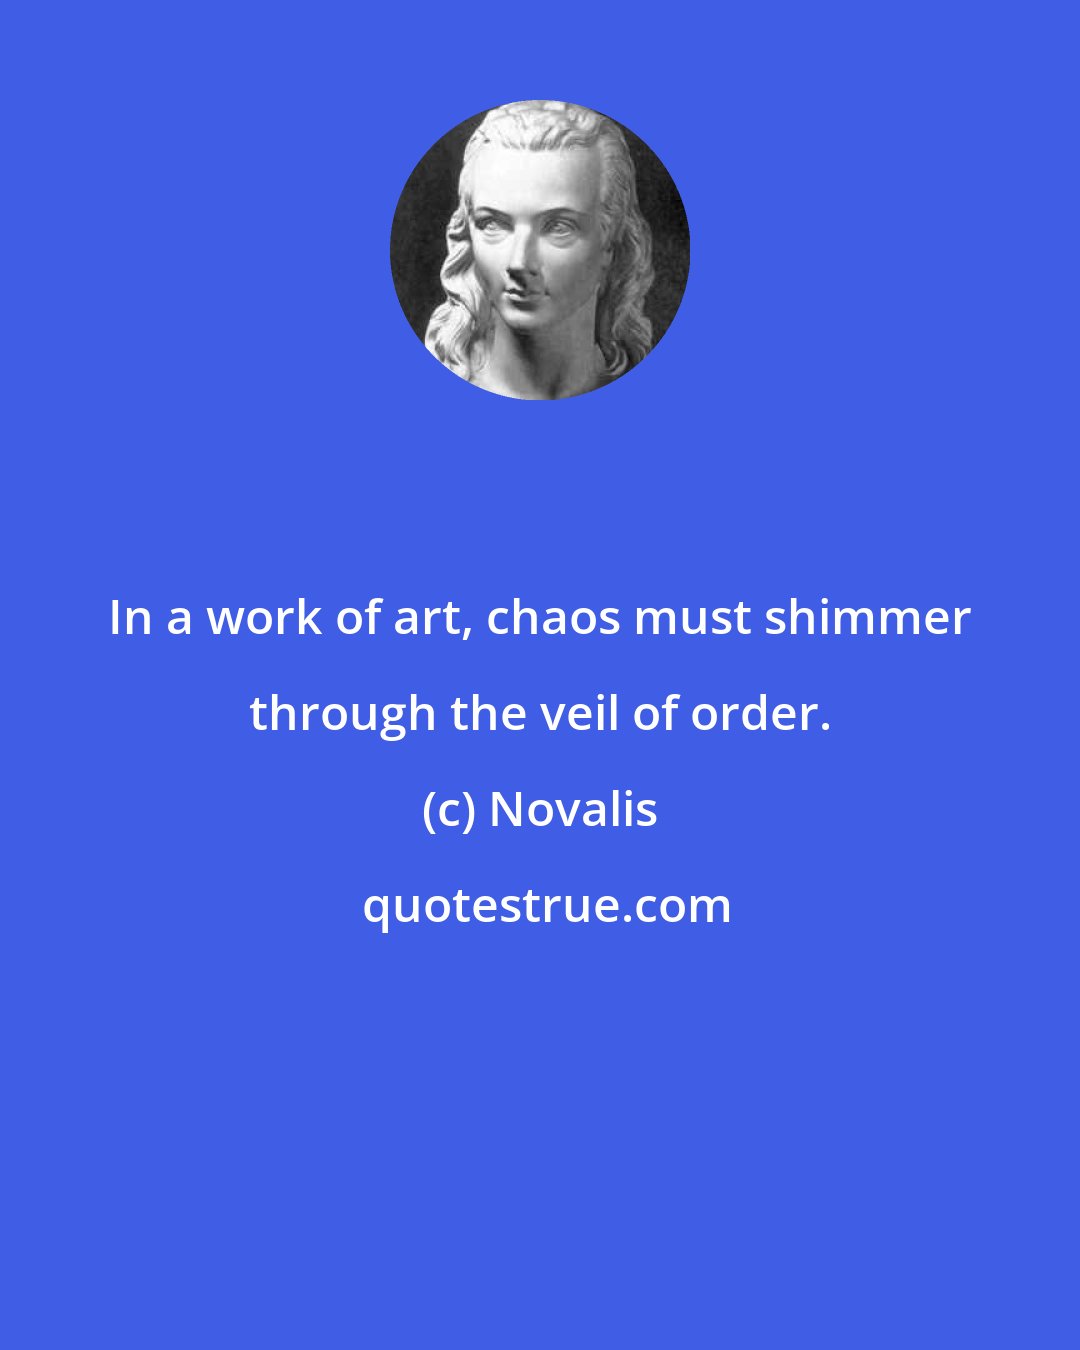 Novalis: In a work of art, chaos must shimmer through the veil of order.